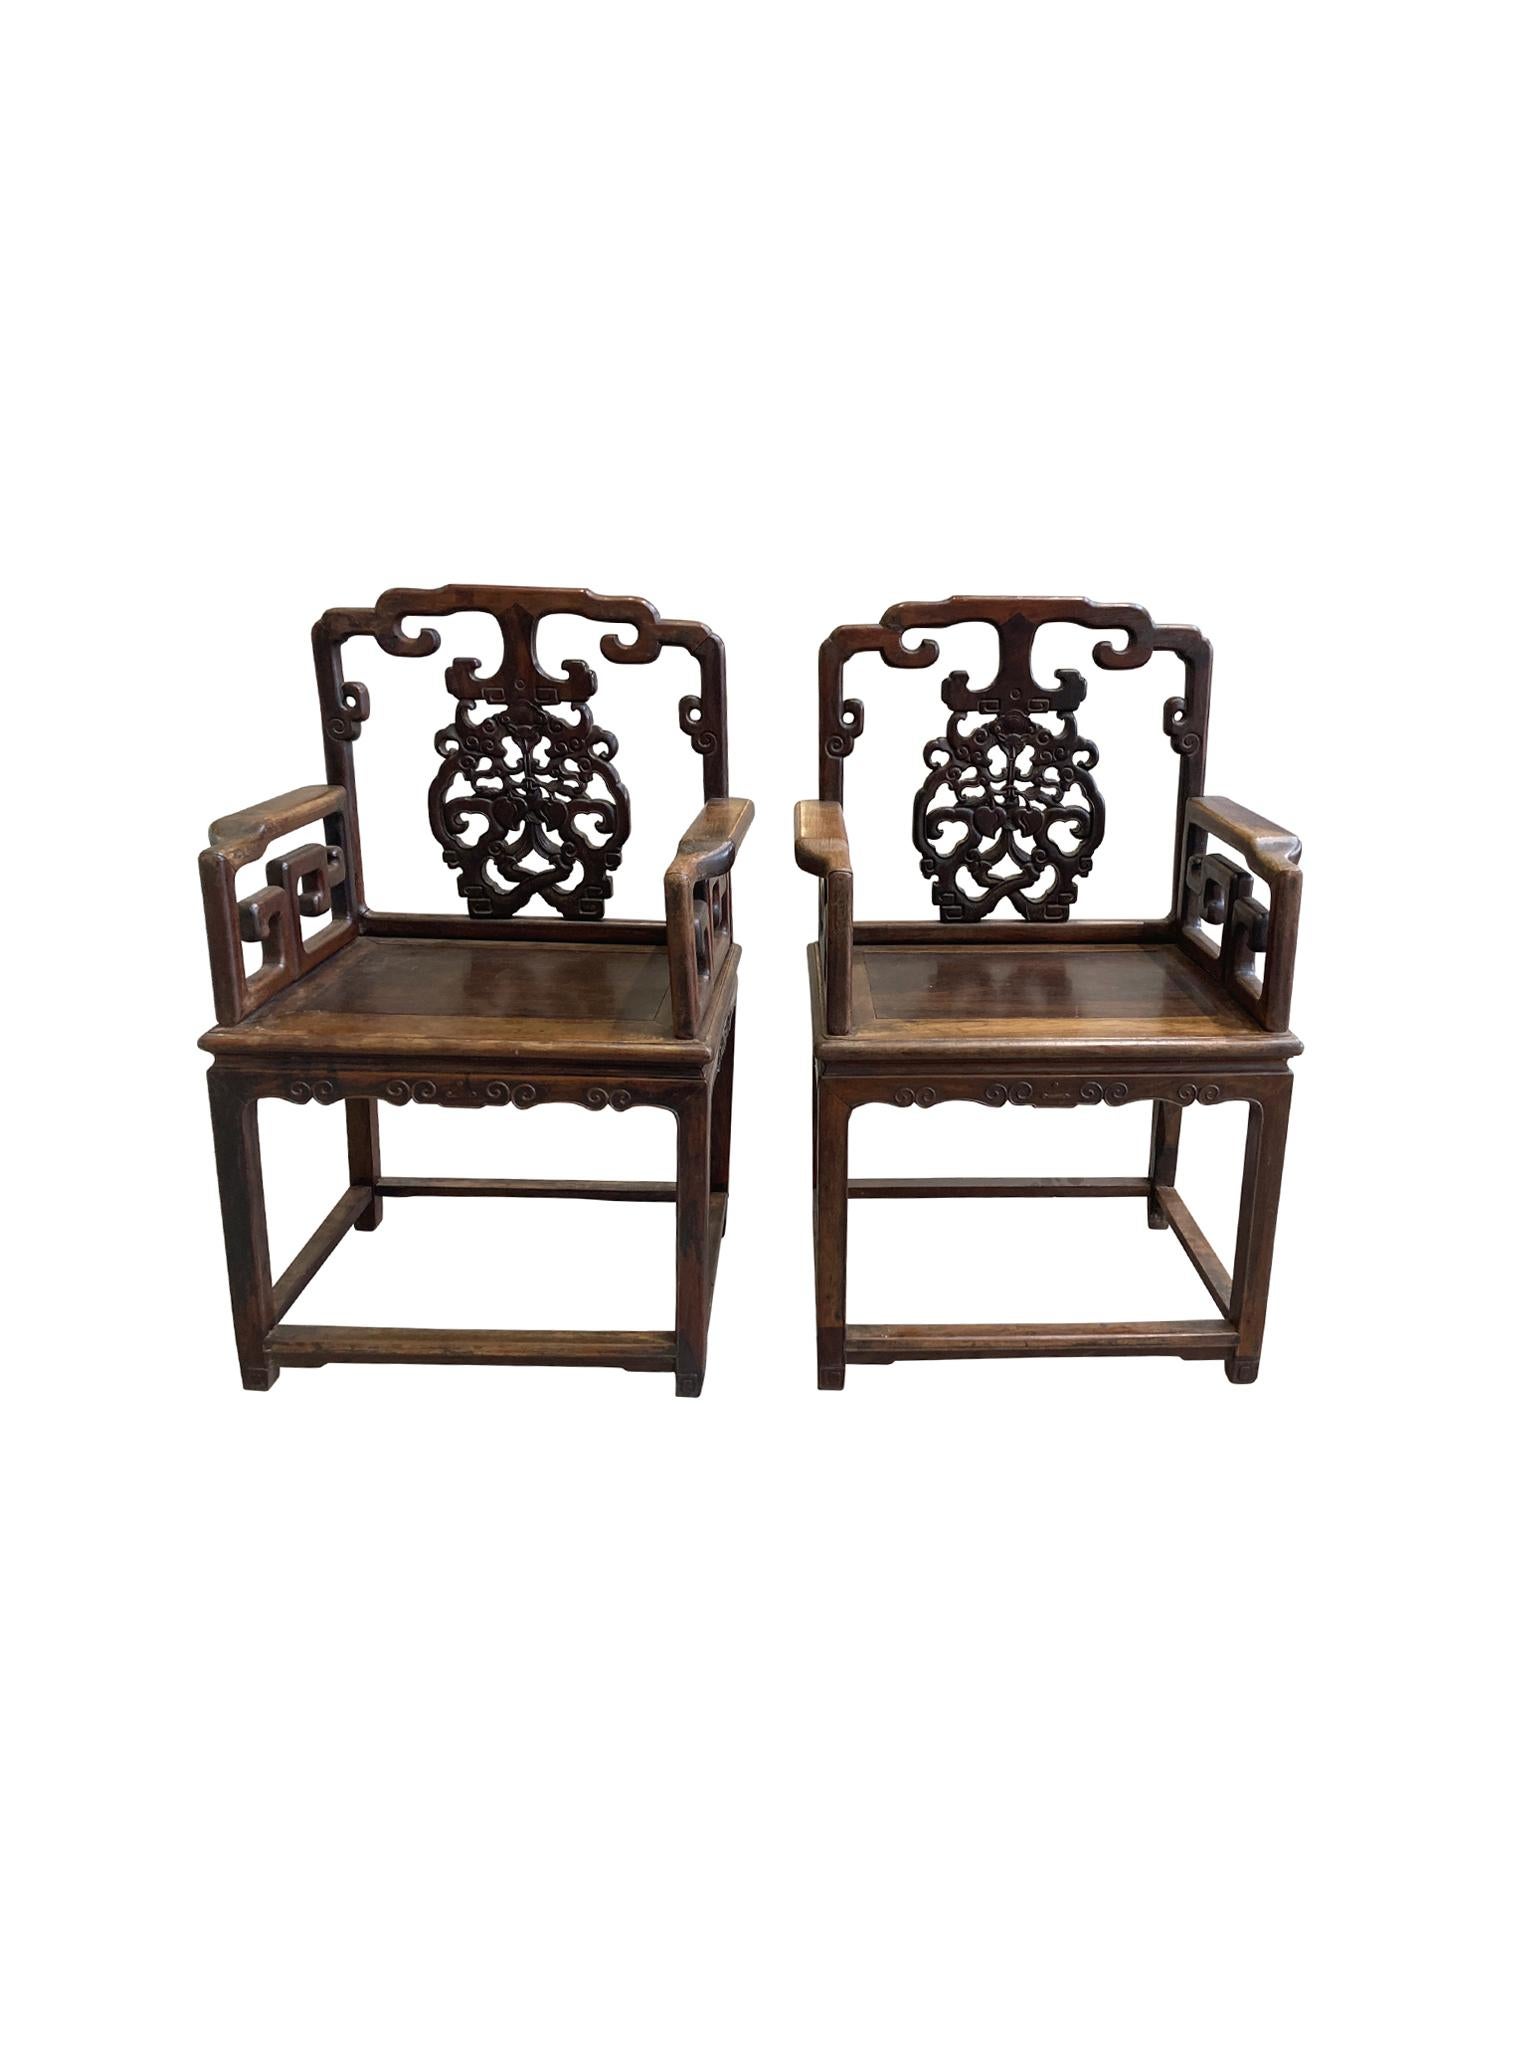 A pair of antique Chinese armchairs crafted from rosewood, possibly Huanghuali rosewood, circa Late 19th century. The back is decorated with hand carved fruit and fauna motifs. We love the combination of intricate swirling forms and the more squared